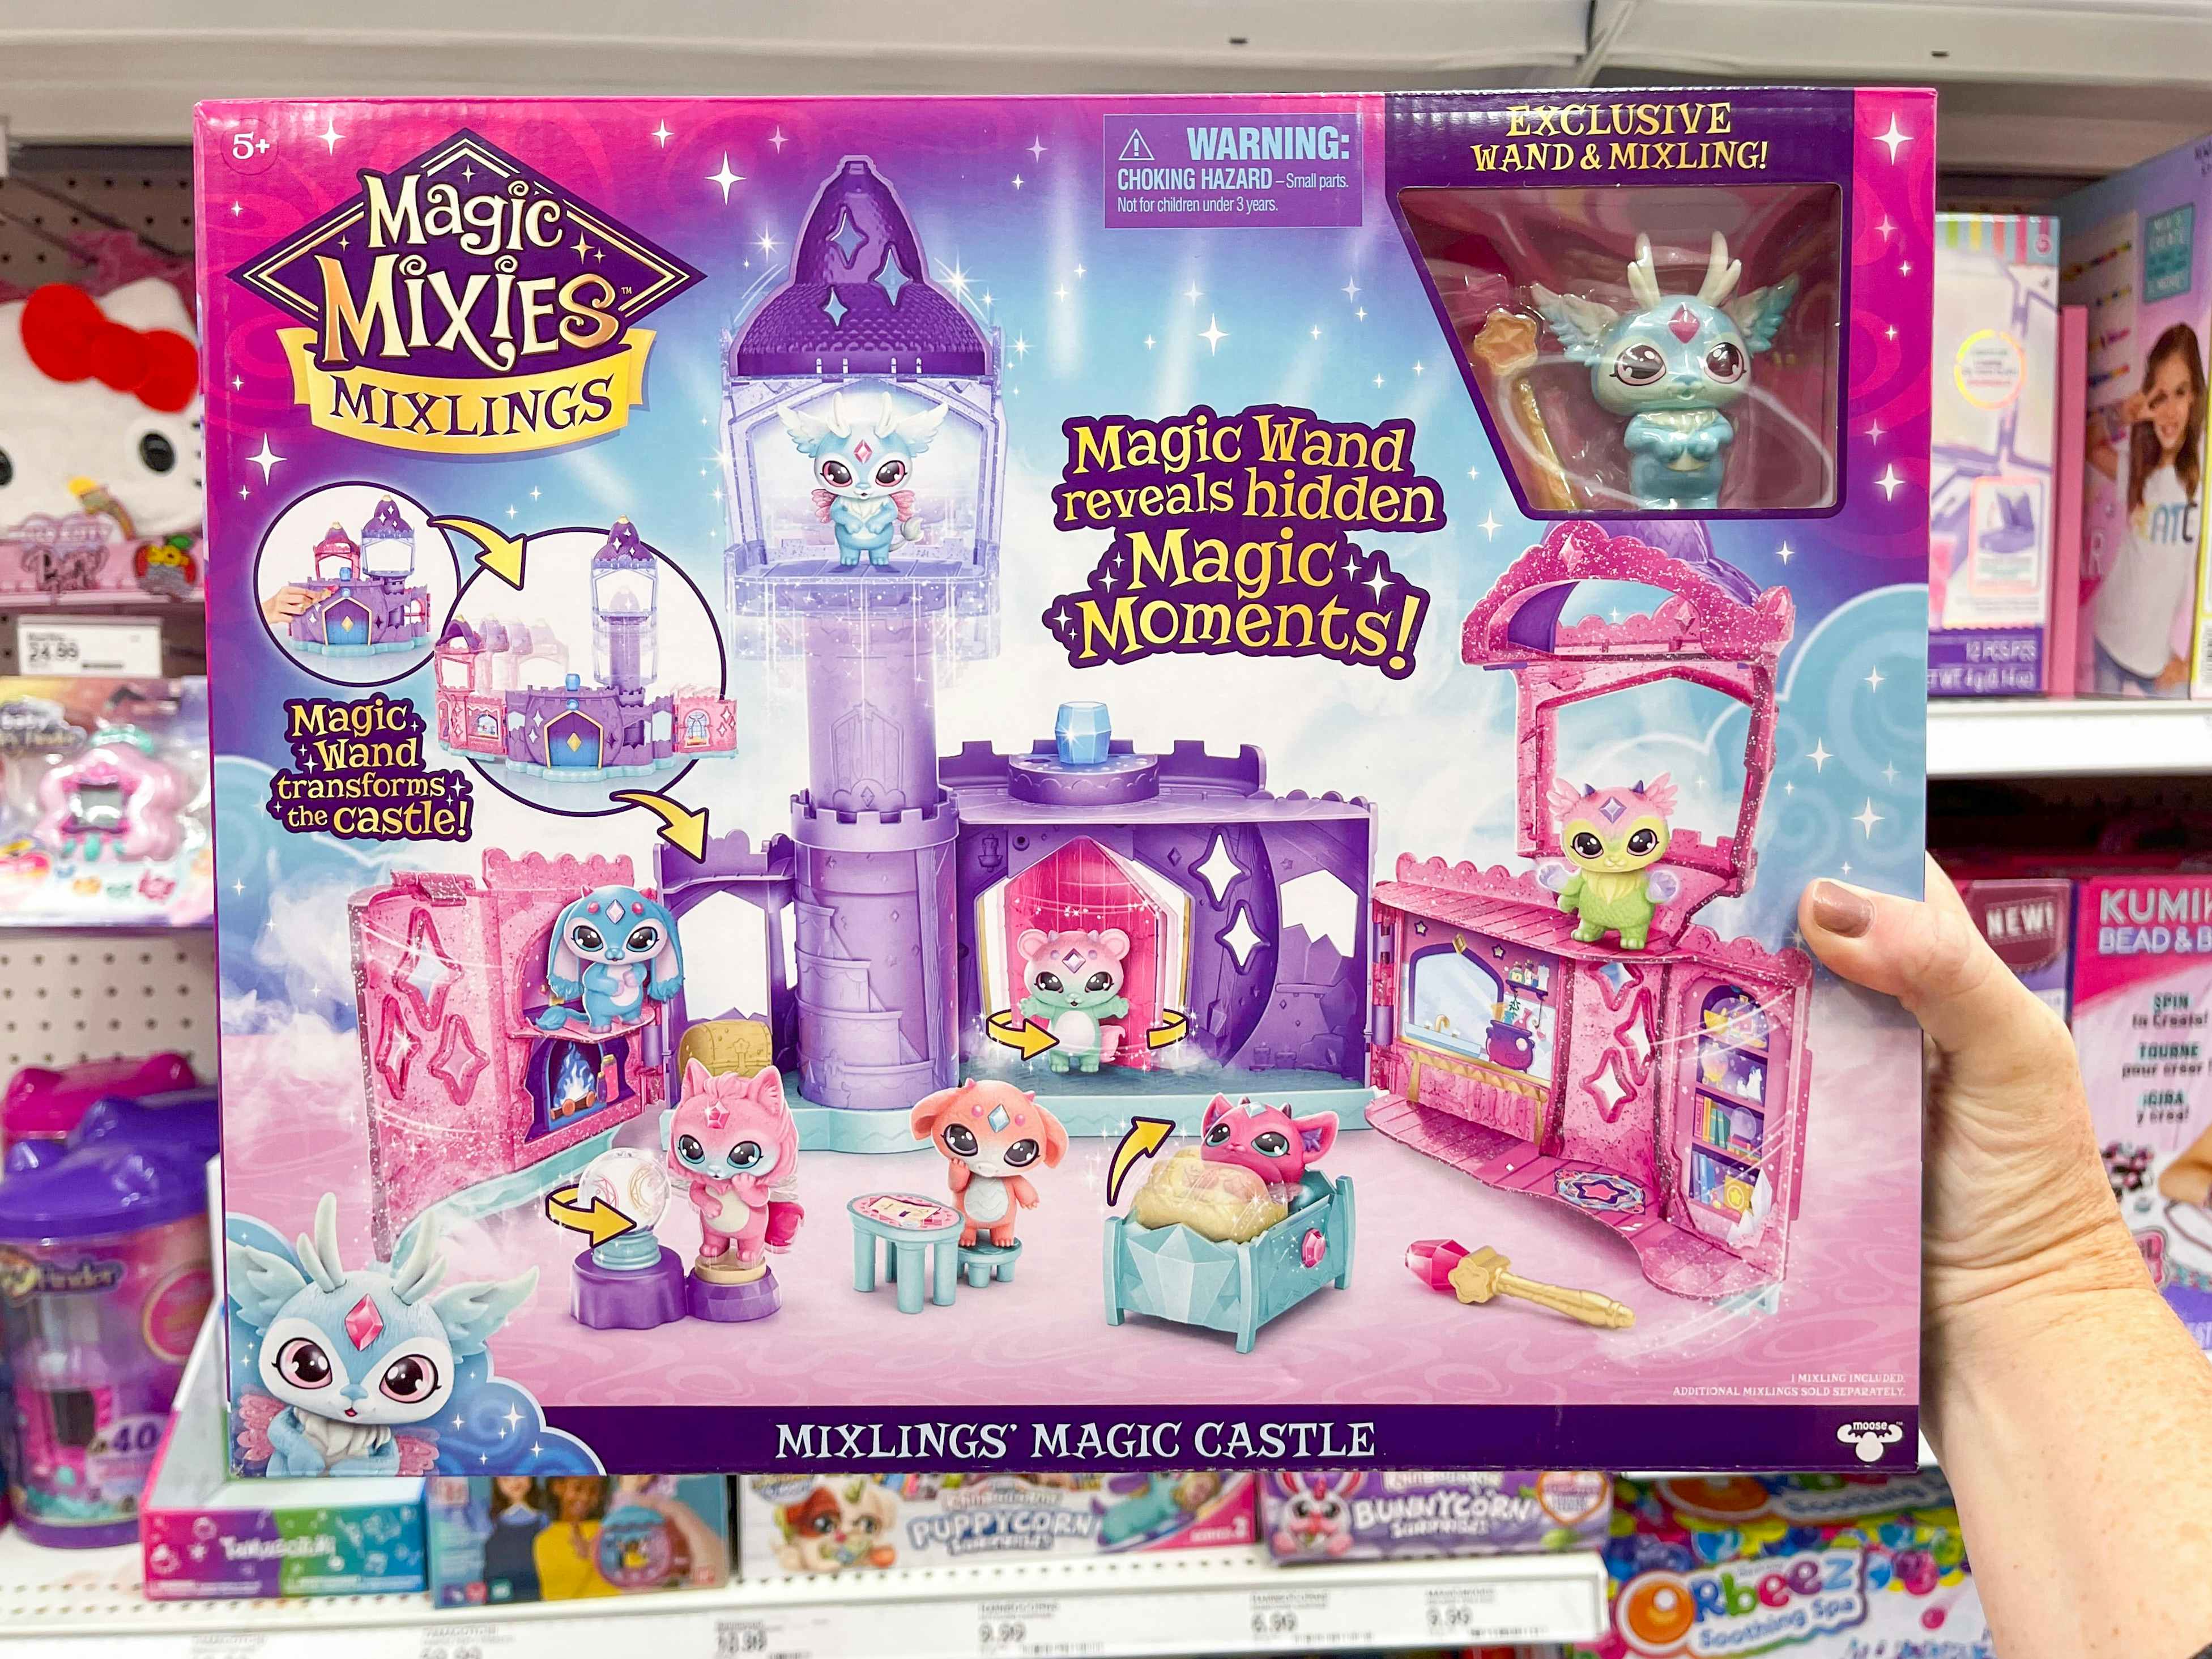 Magic Mixies Moonlight Magic Crystal Ball Exclusive Glow In The Dark Mixie  NEW